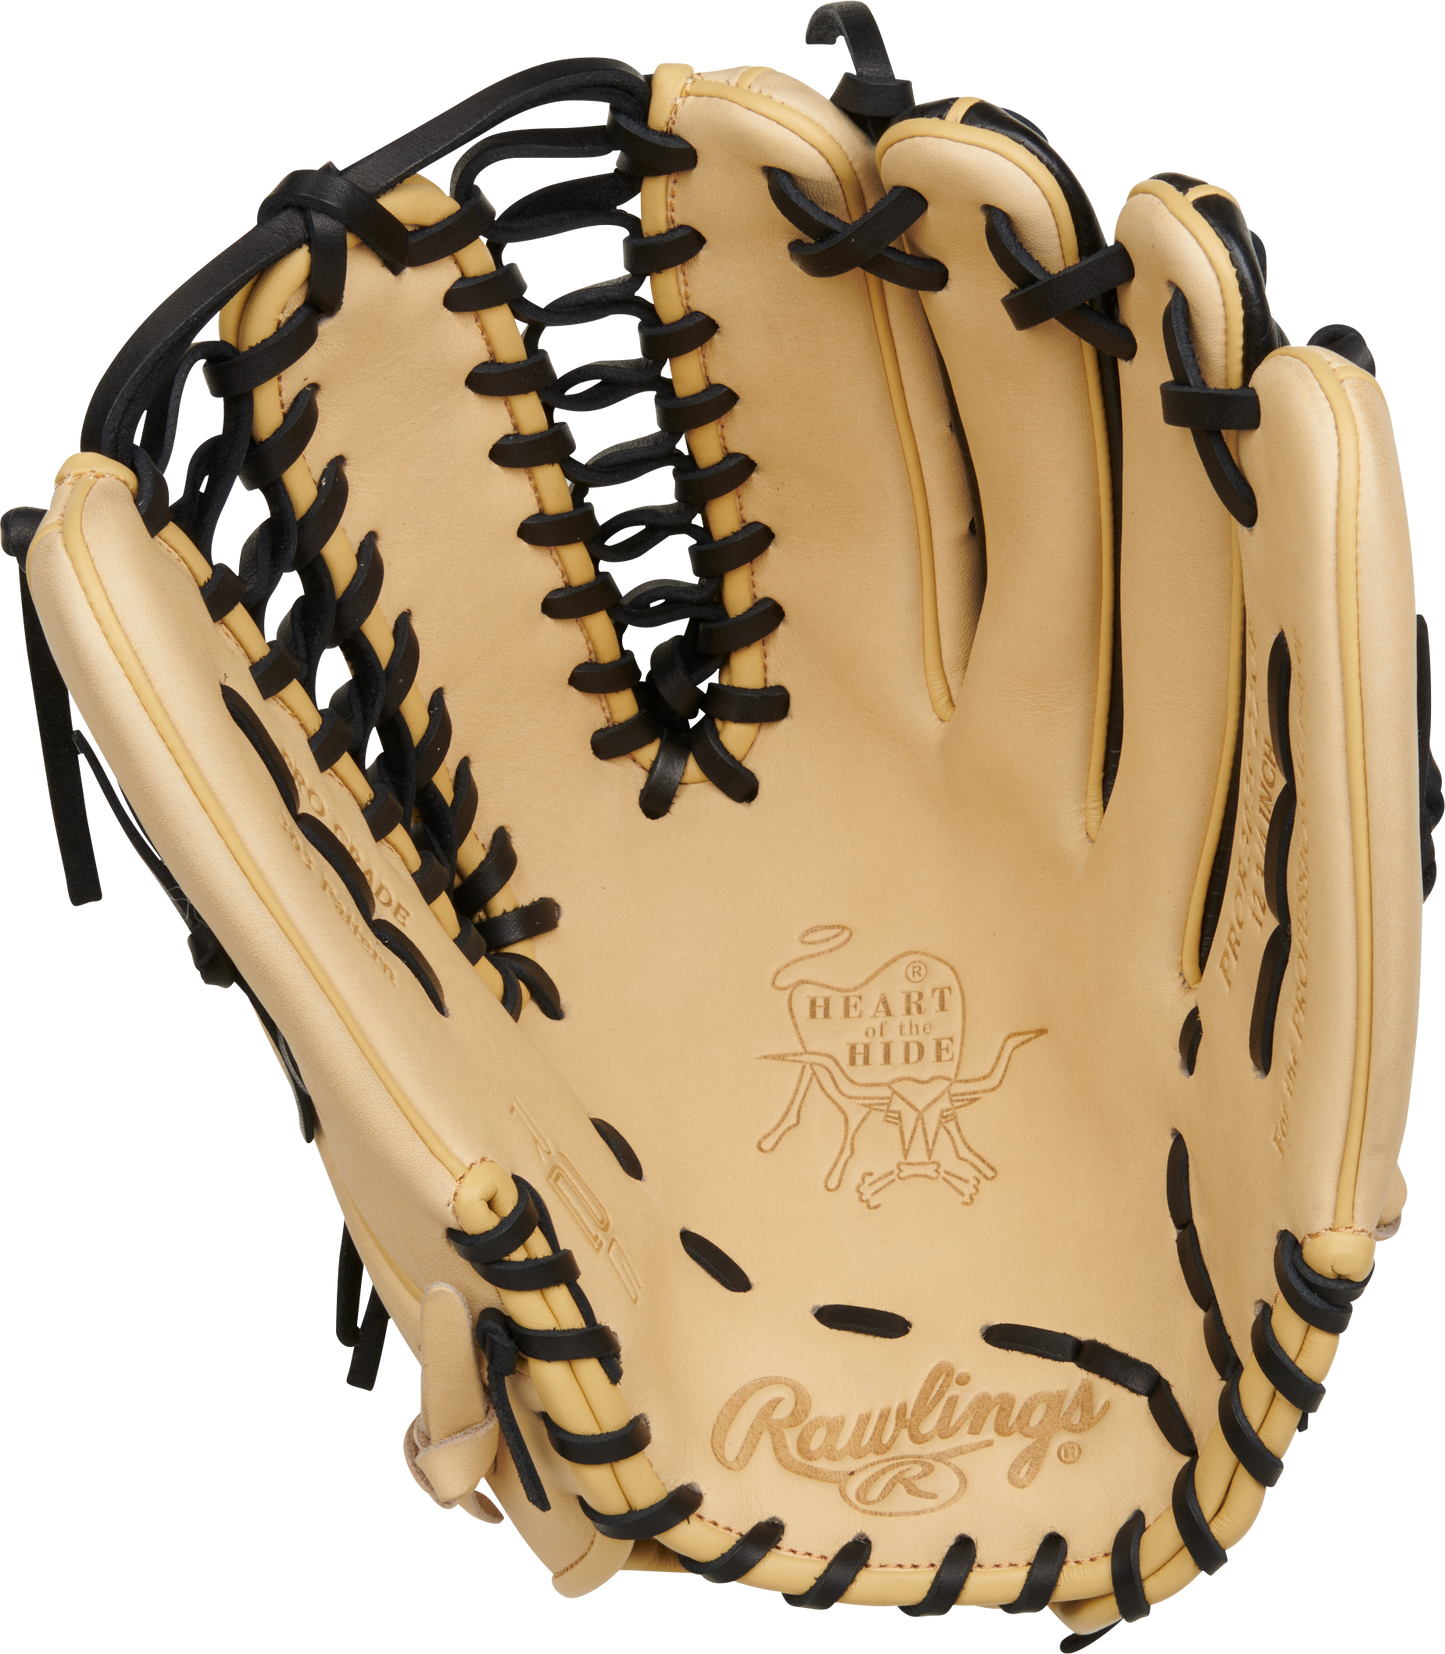 RAWLINGS HEART OF THE HIDE 12.75" TRAP-EZE OUTFIELD GLOVE